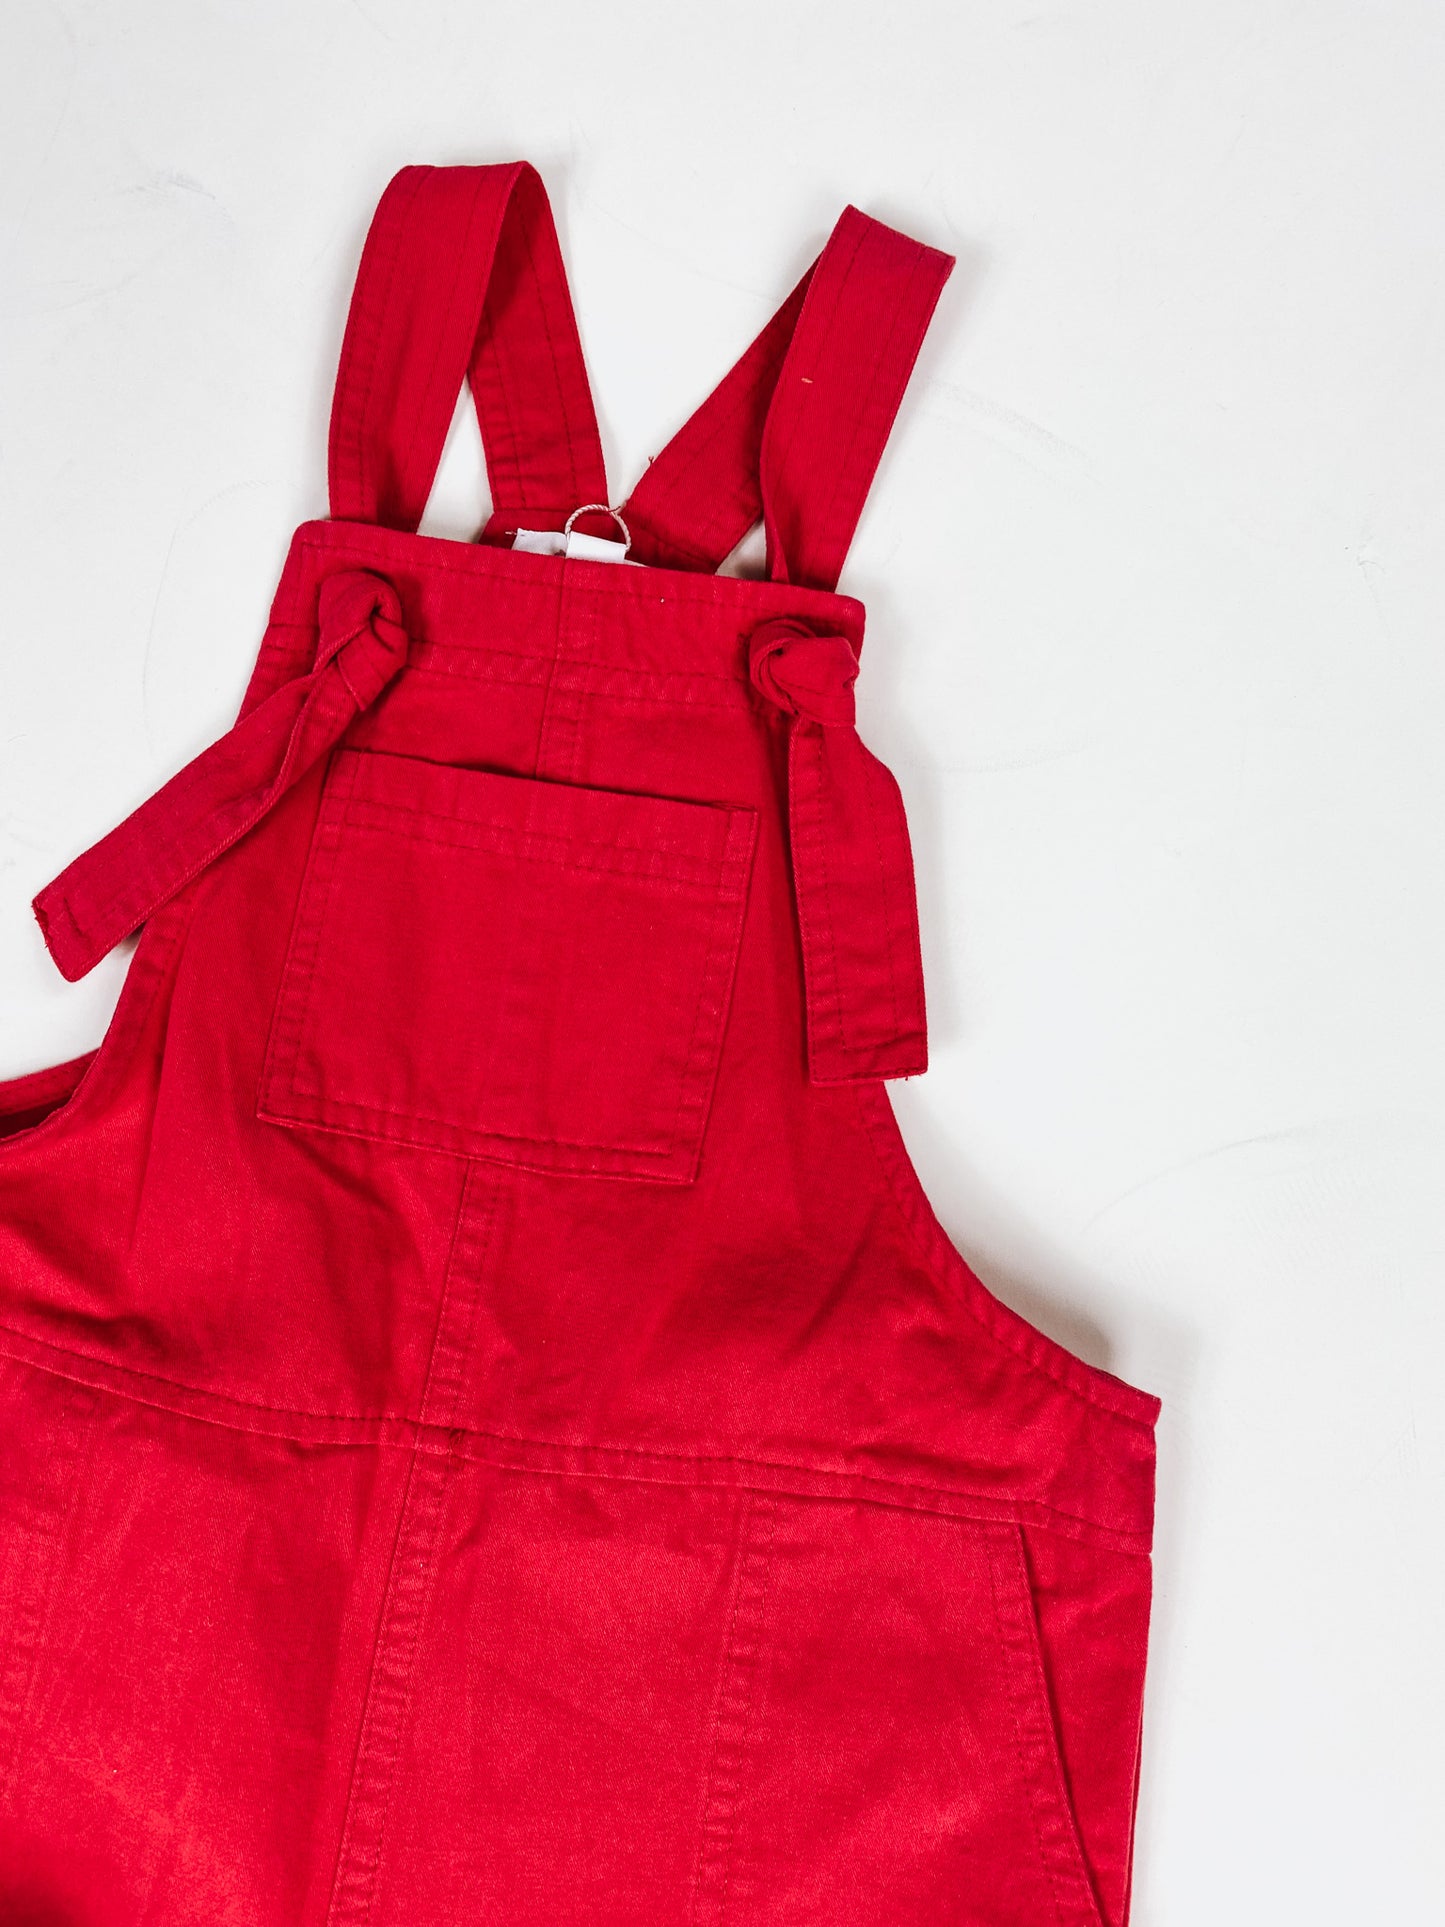 Youth Girls Scarlet Red Overalls